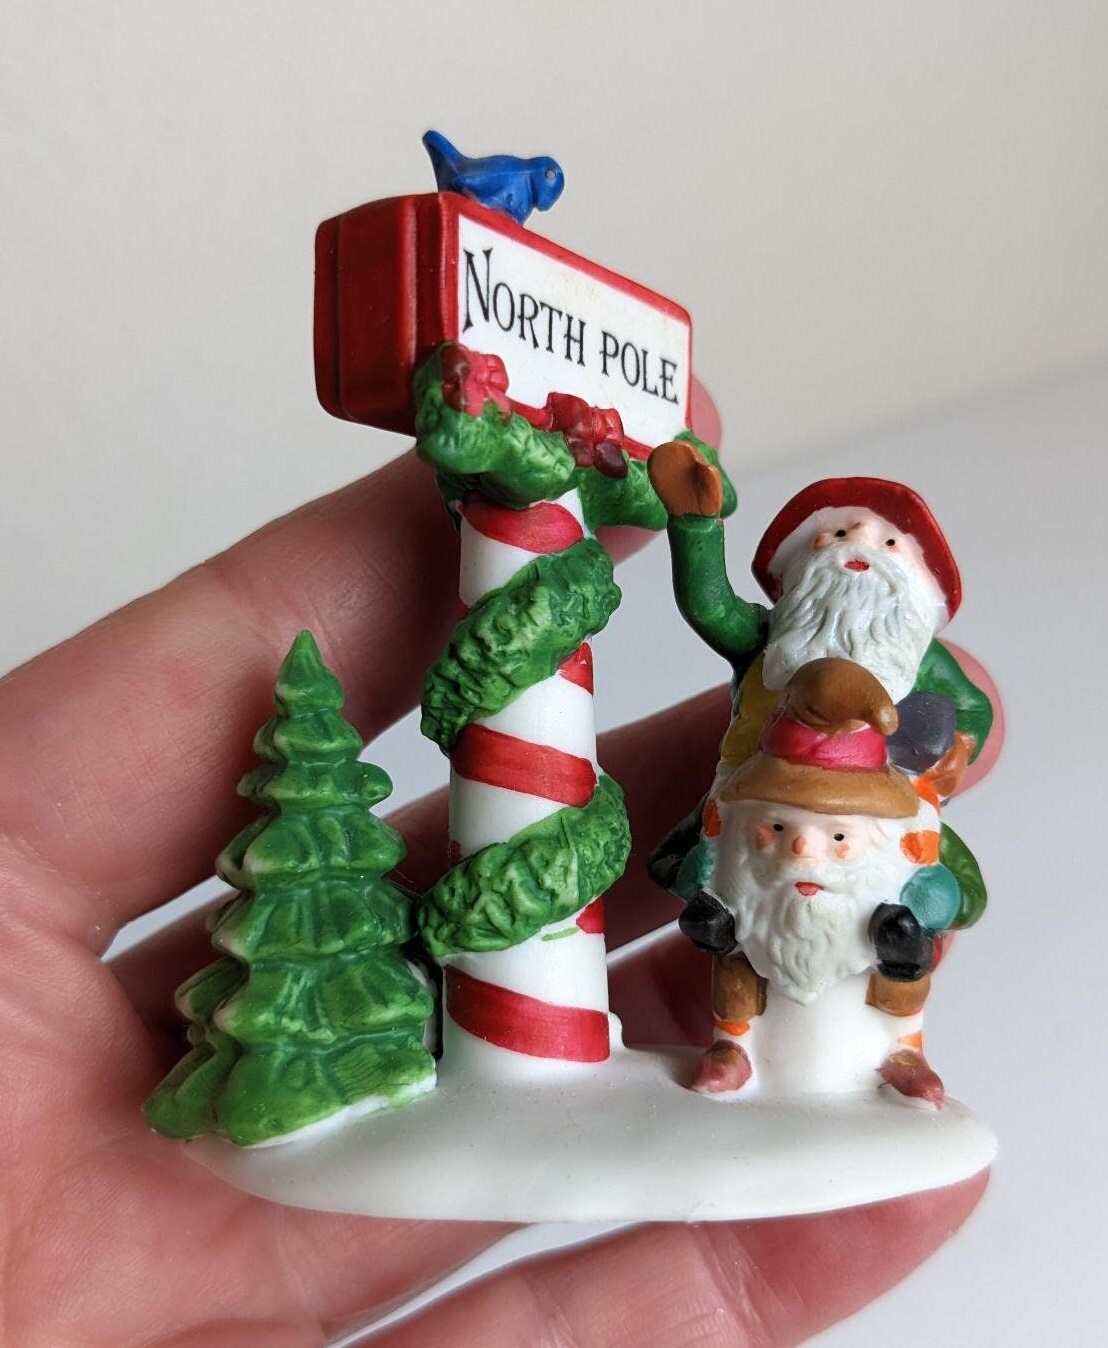 'Trimming The North Pole' Christmas Village Accessories